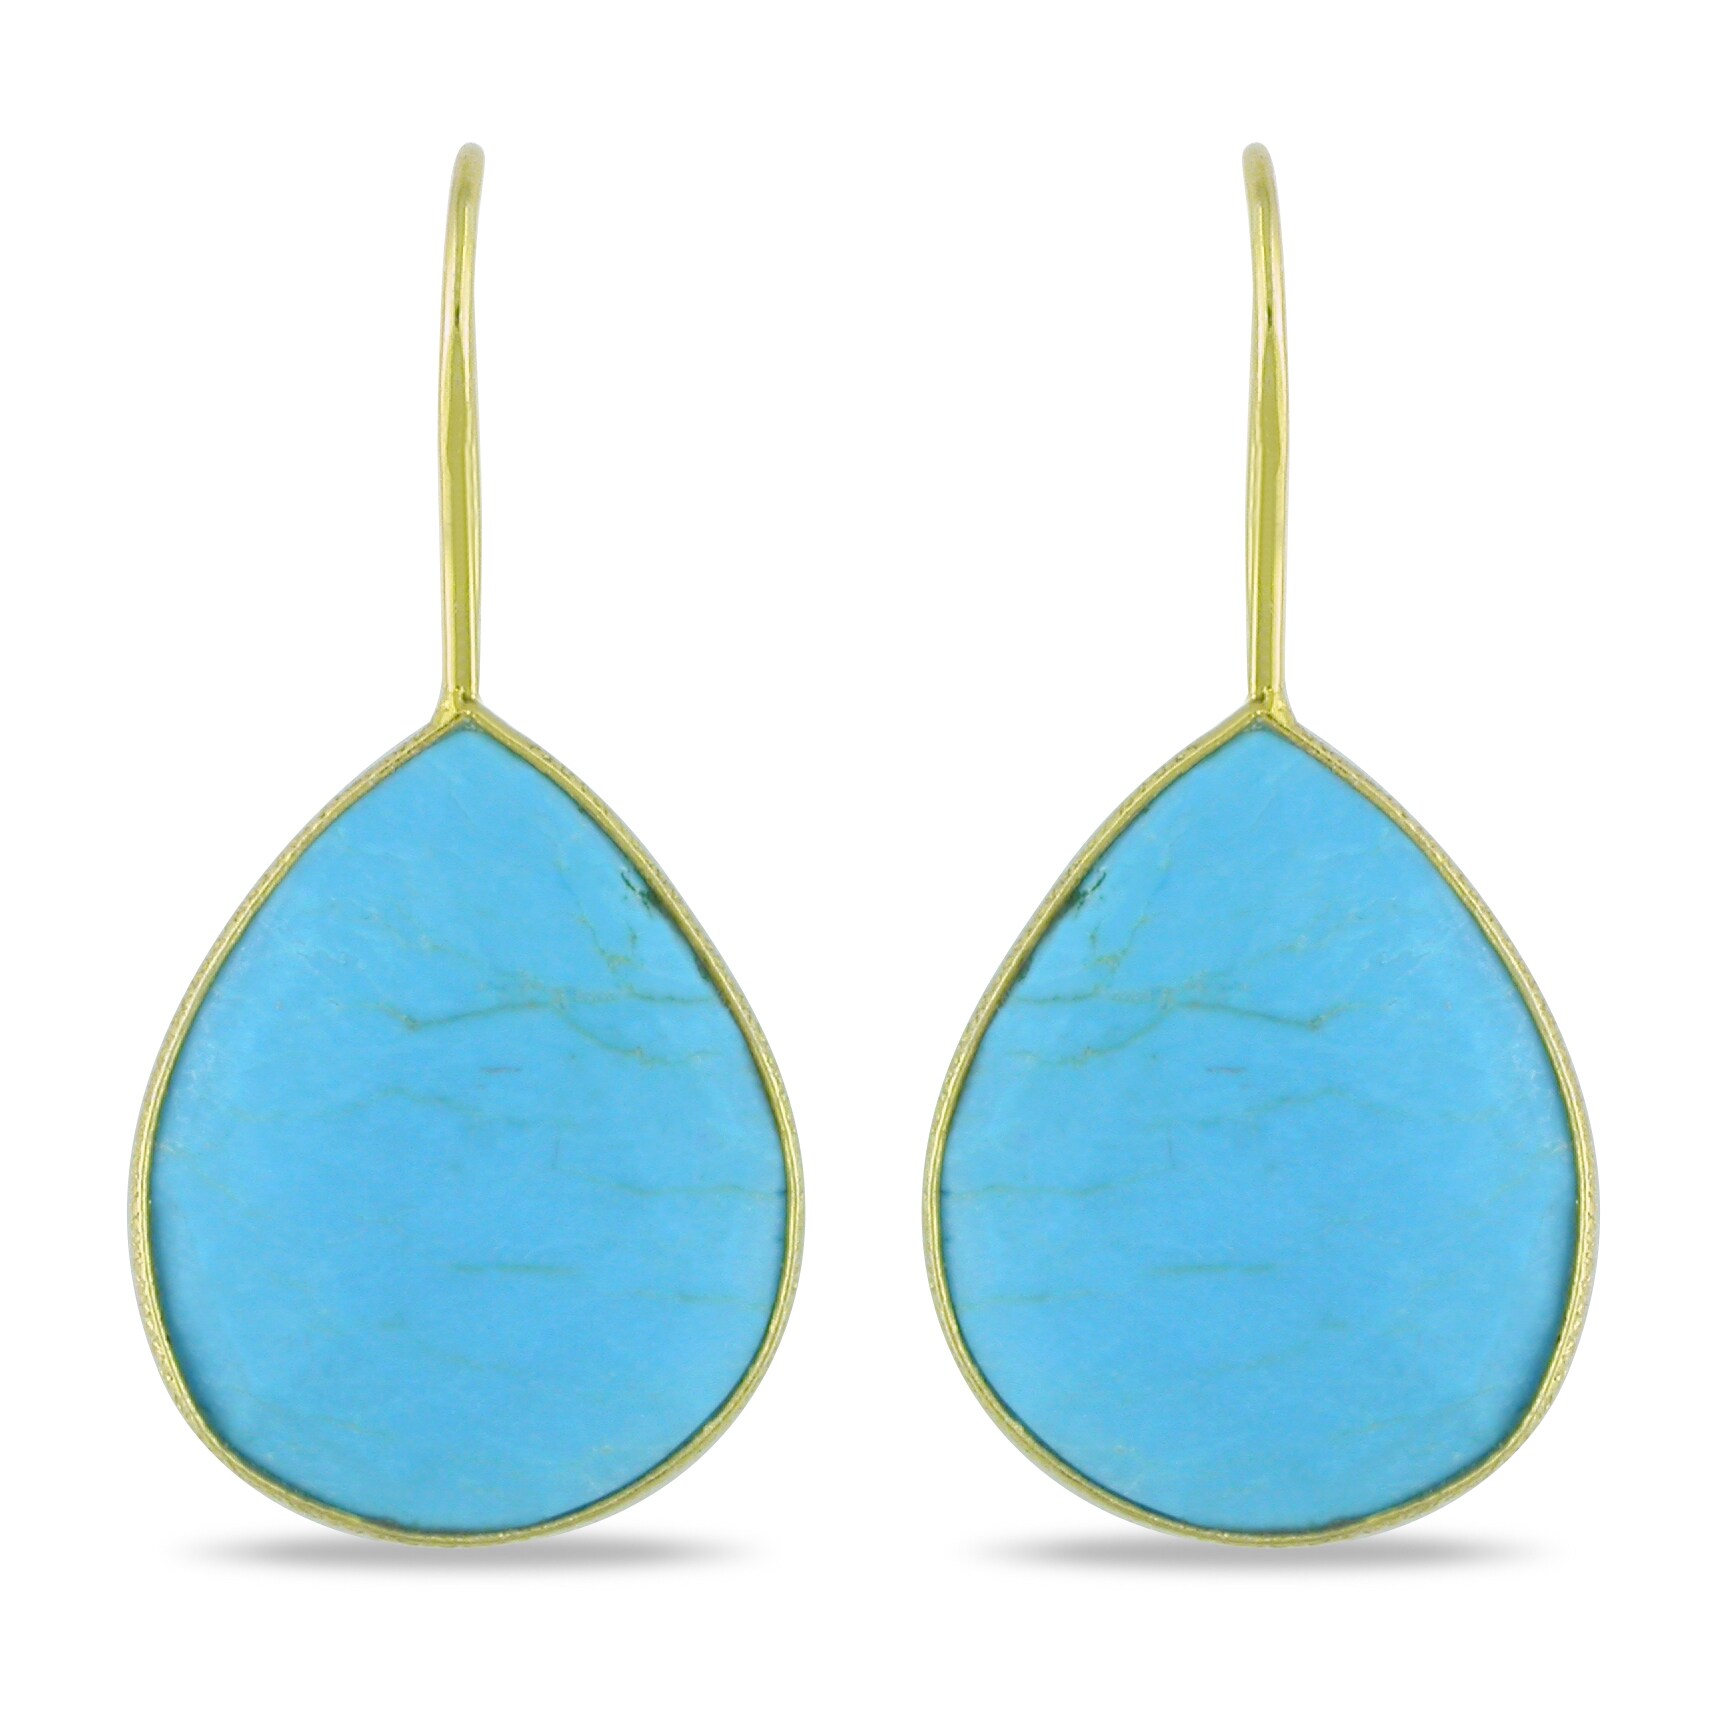 Miadora 22k Gold Plated Silver Turquoise Dangle Earrings